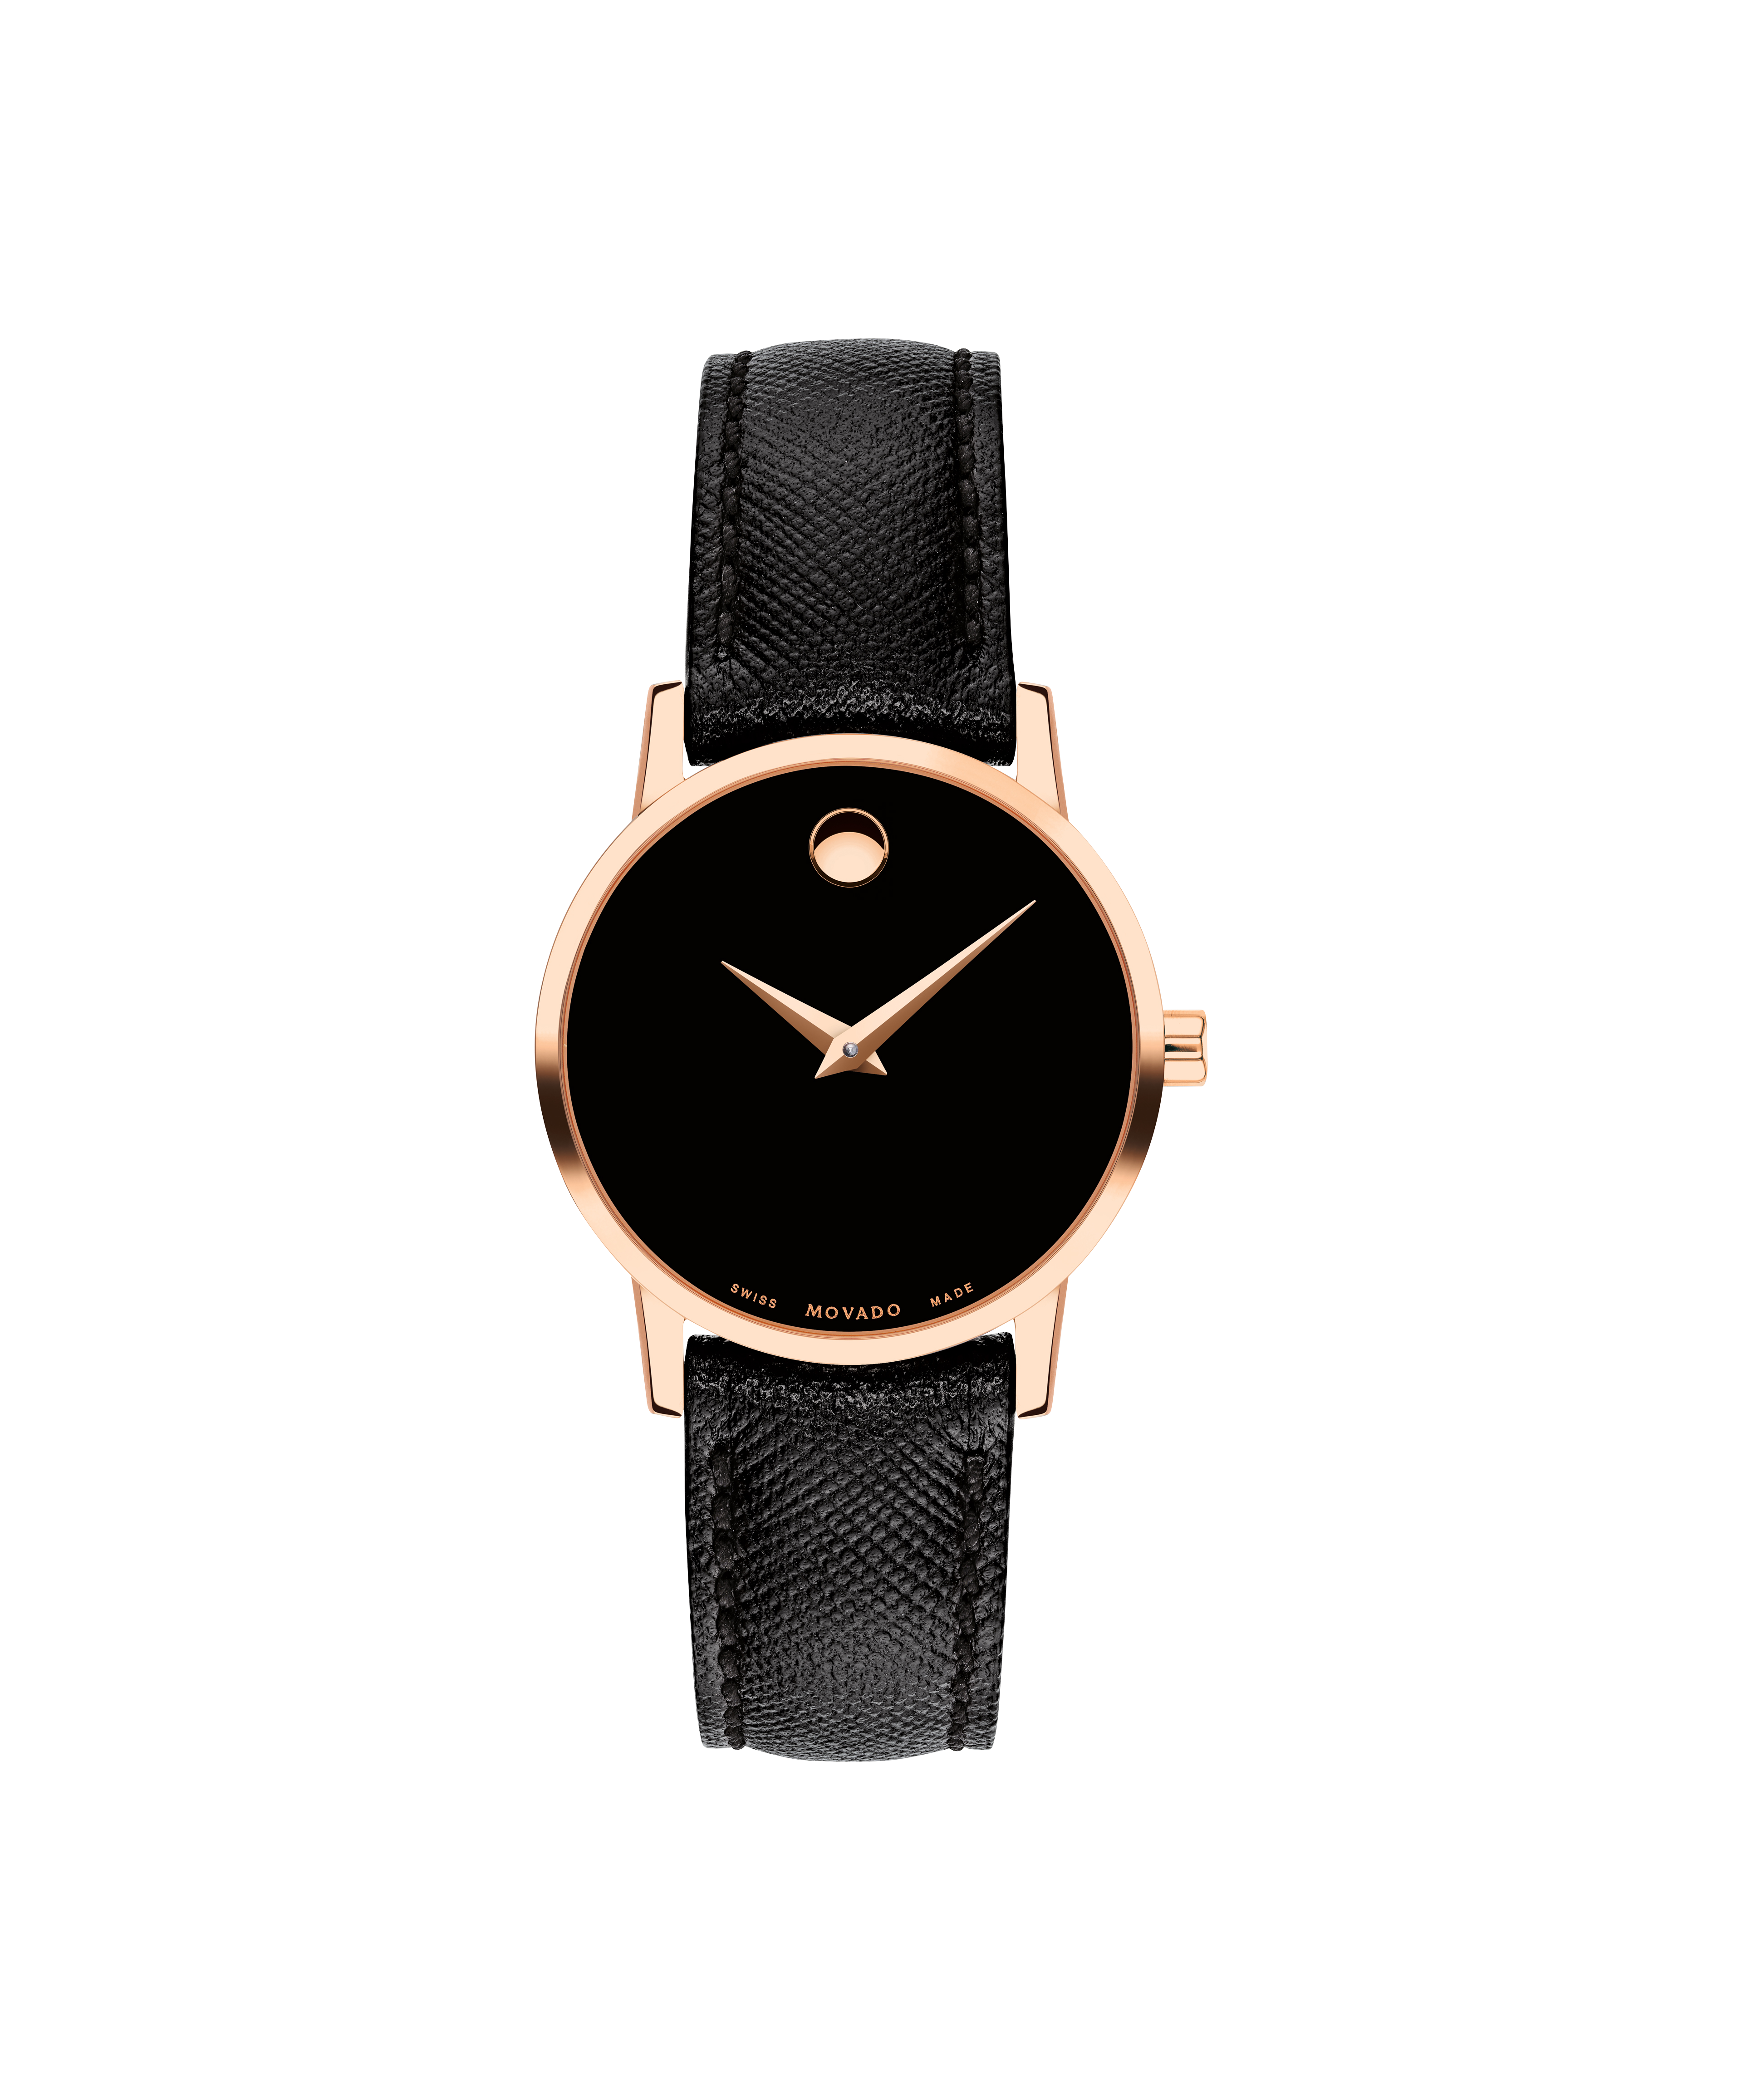 Movado Men's Automatic Watch 1881 Limited Edition 750 Rose Gold